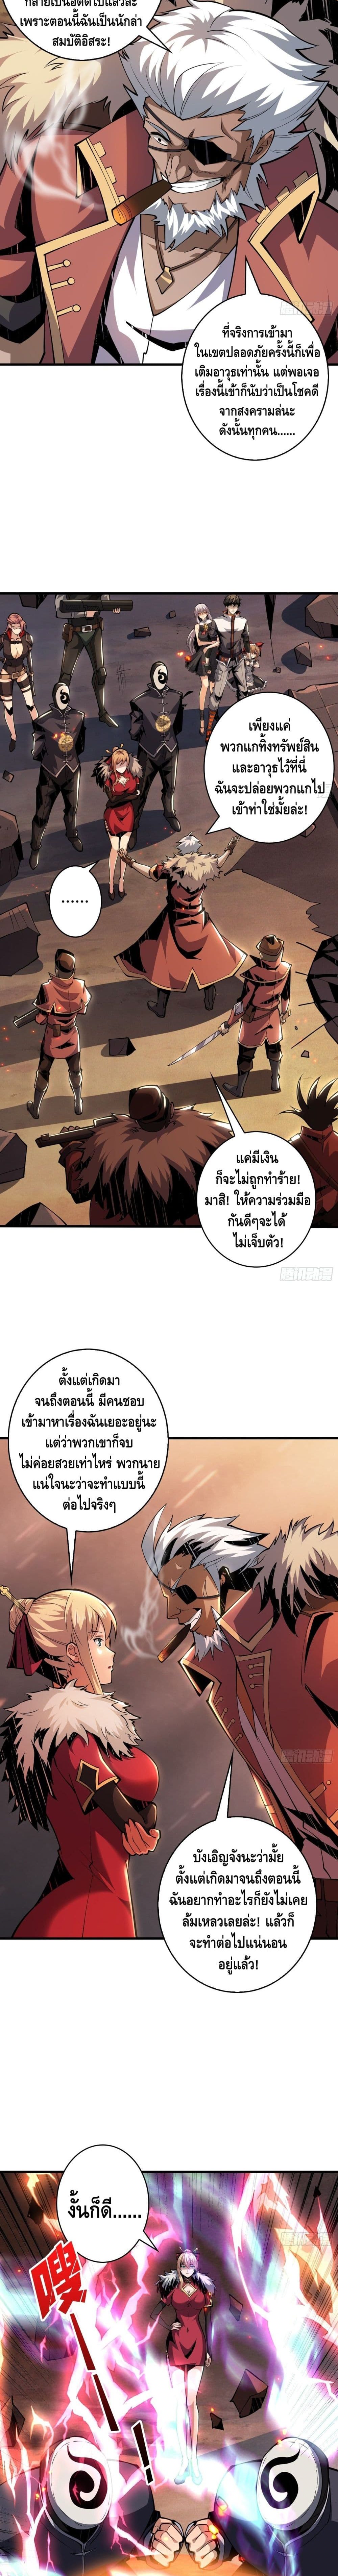 King Account at the Start - หน้า 3